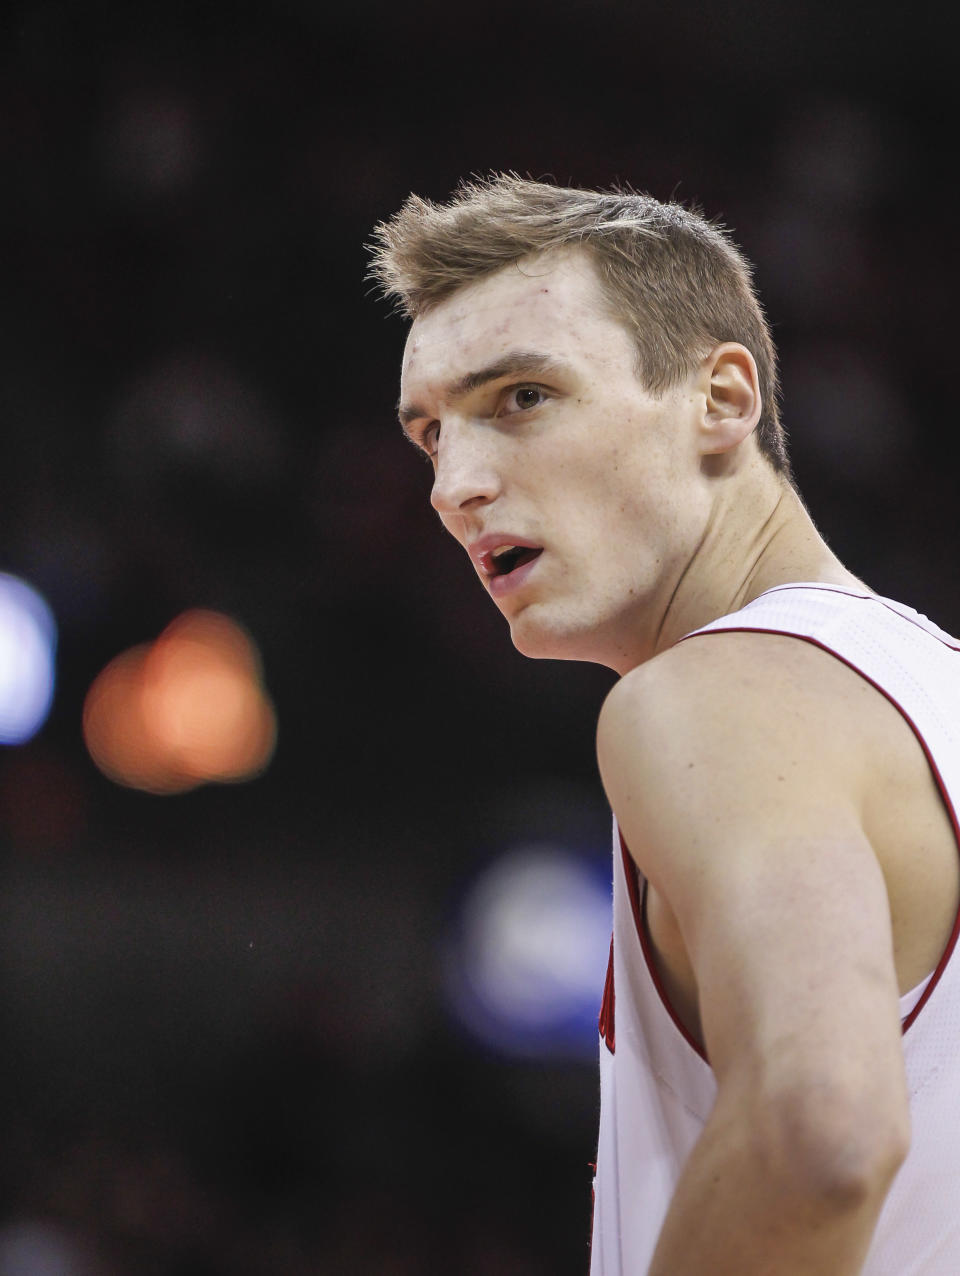 Wisconsin forward Sam Dekker looks at a referee after being called for a foul against Ohio State during the first half of an NCAA college basketball game Saturday, Feb. 1, 2014, in Madison, Wis. Ohio State upset Wisconsin, 59-58. (AP Photo/Andy Manis)